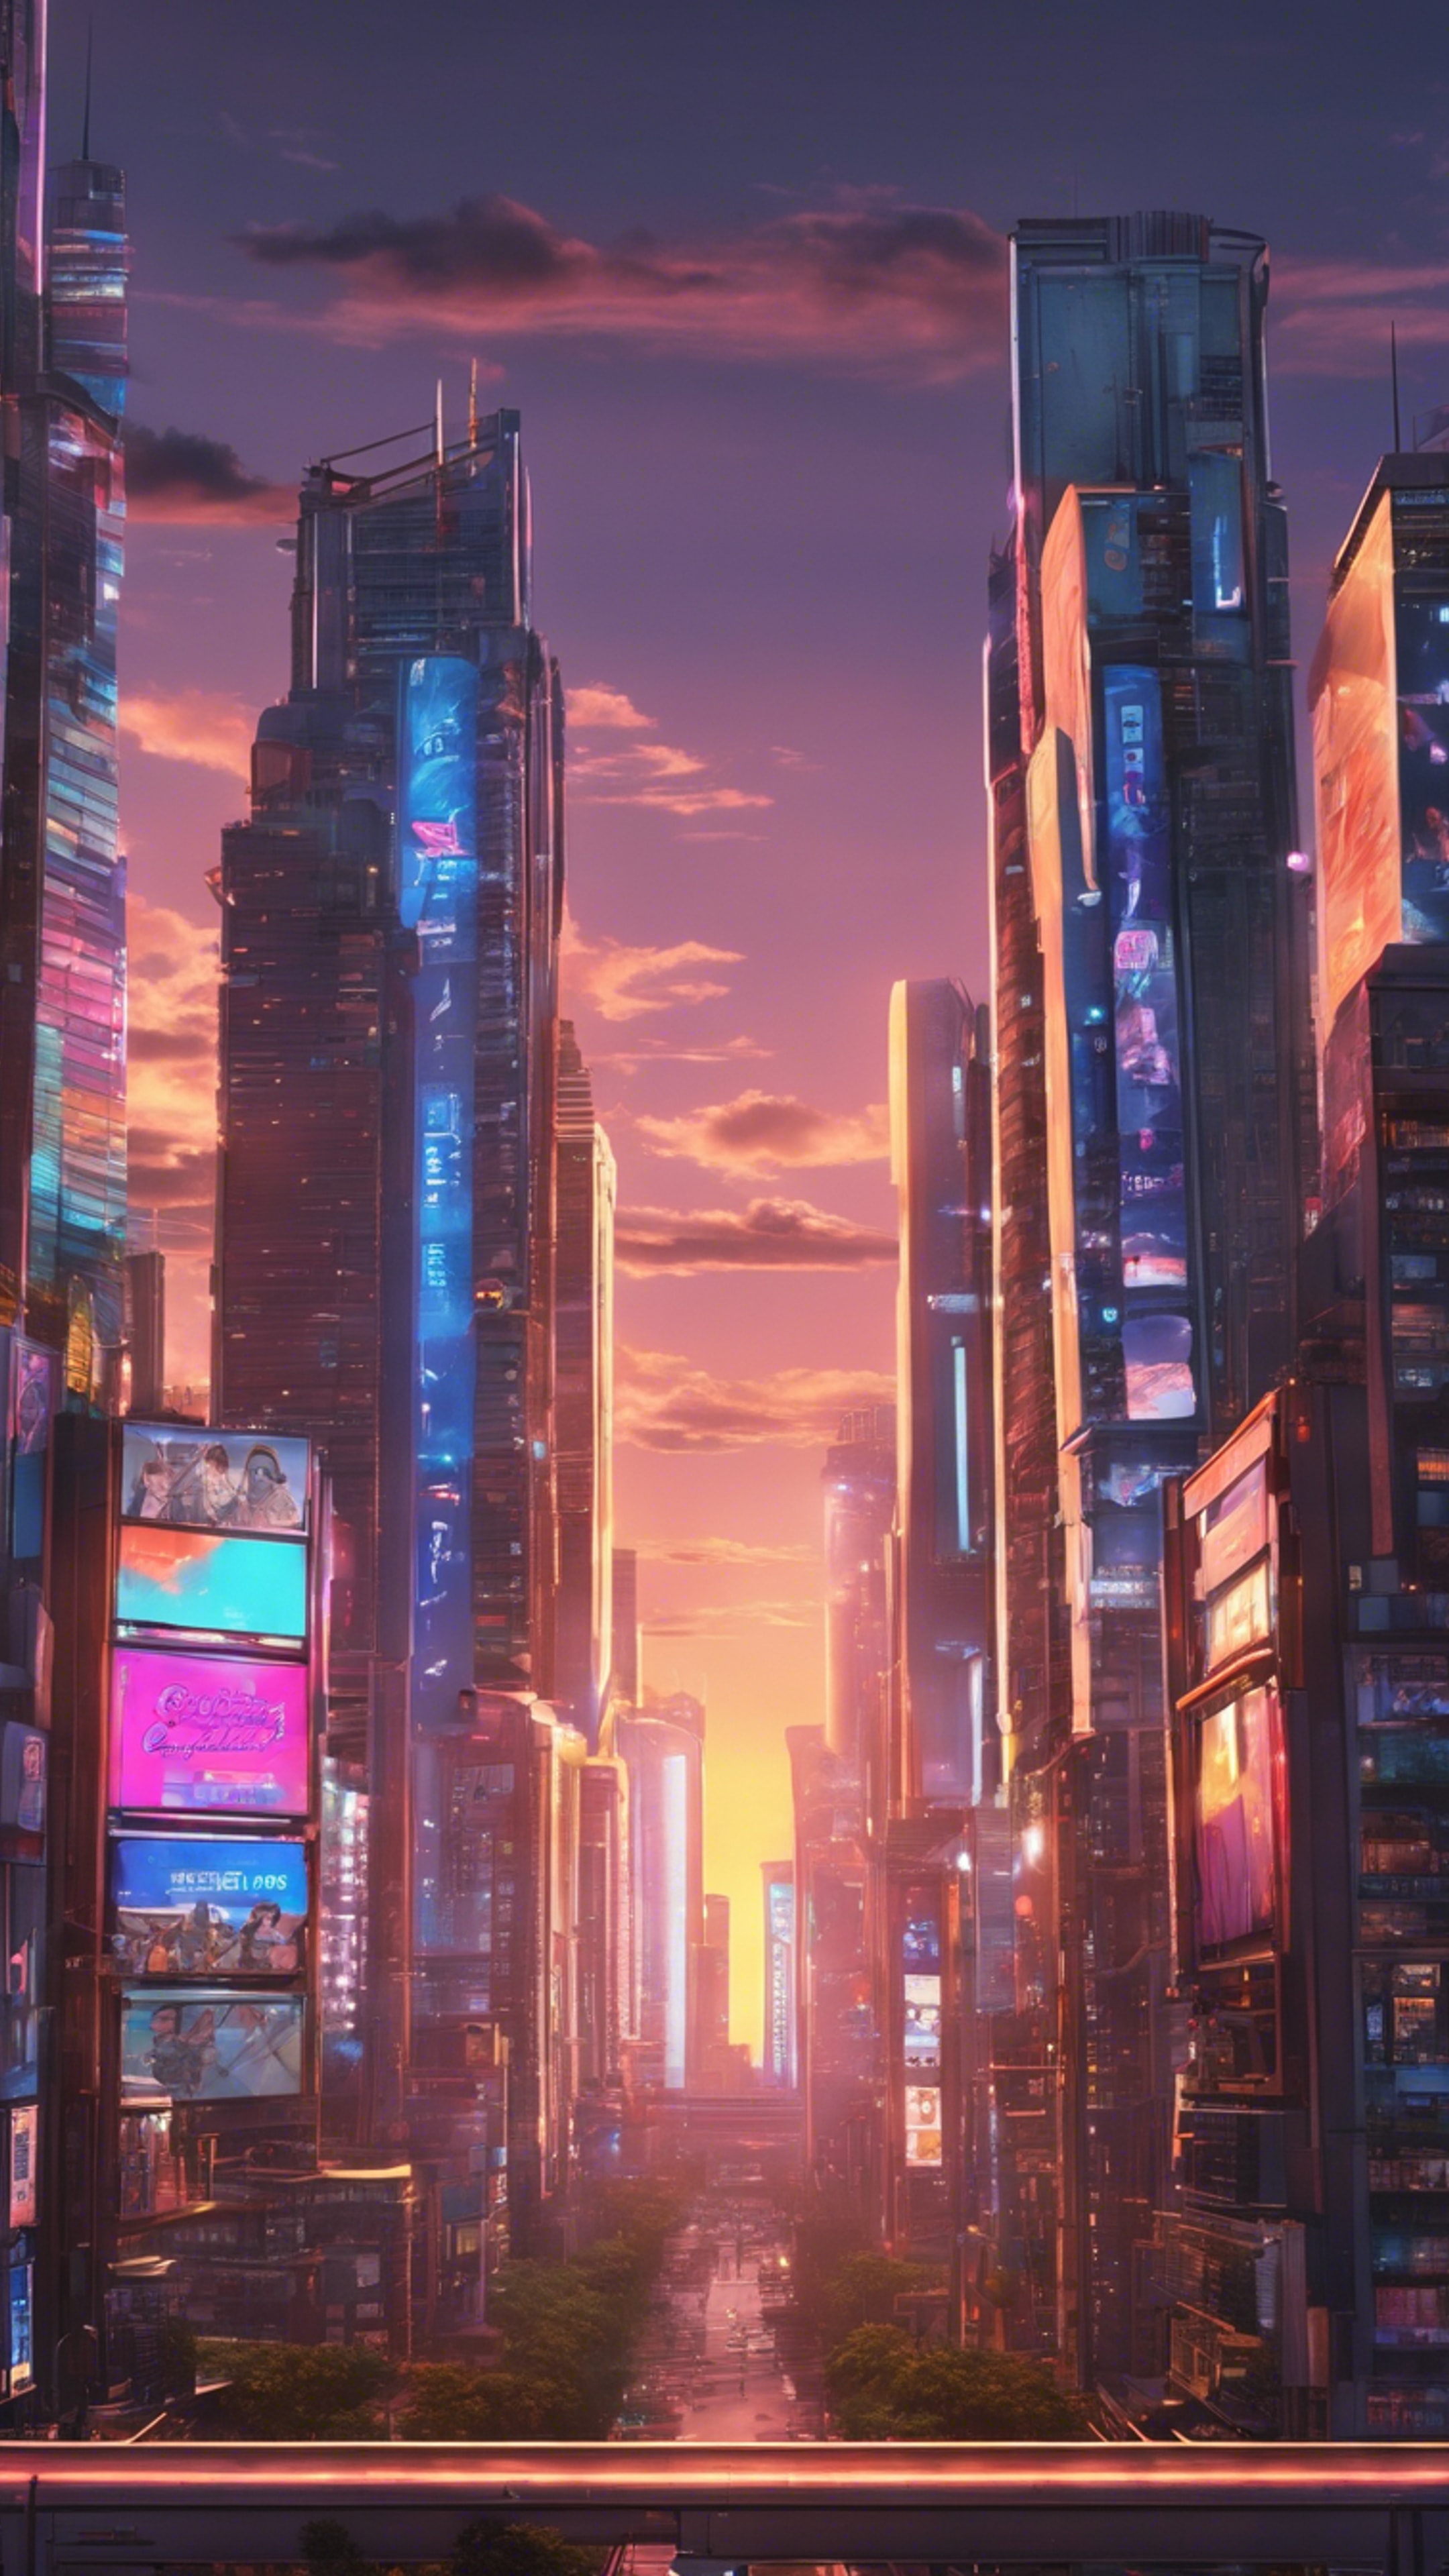 A cool anime-themed cityscape at sunset with towering skyscrapers and glowing neon billboards. Tapet[63ed83801d984cce89ed]